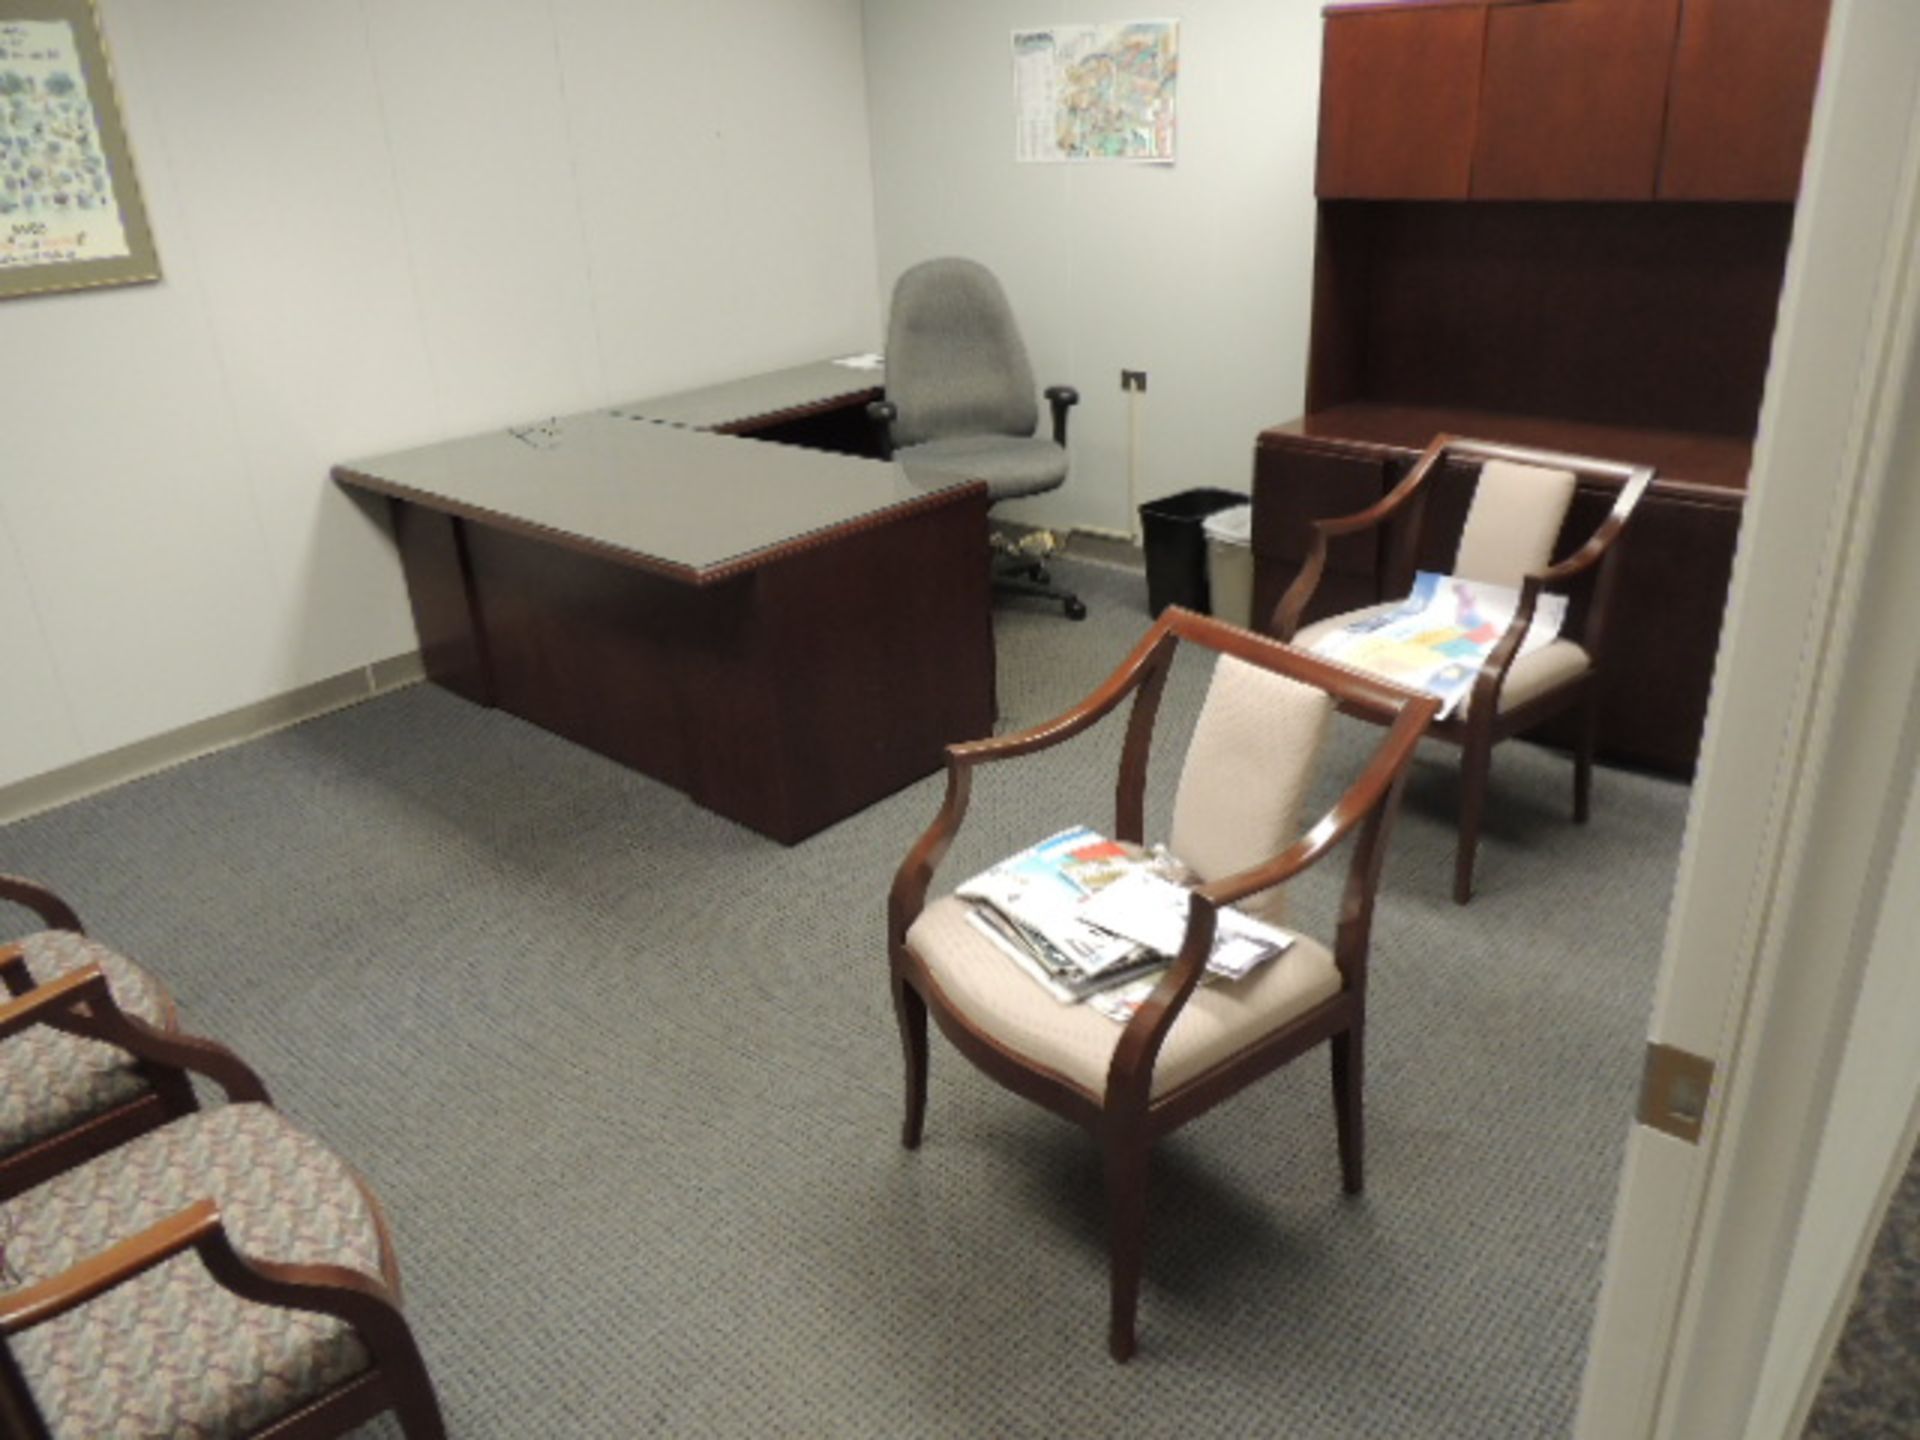 Office Cubicles & Contents. Lot: (8) offices w/ wooden and metal desks, file cabinets and lateral - Image 12 of 47